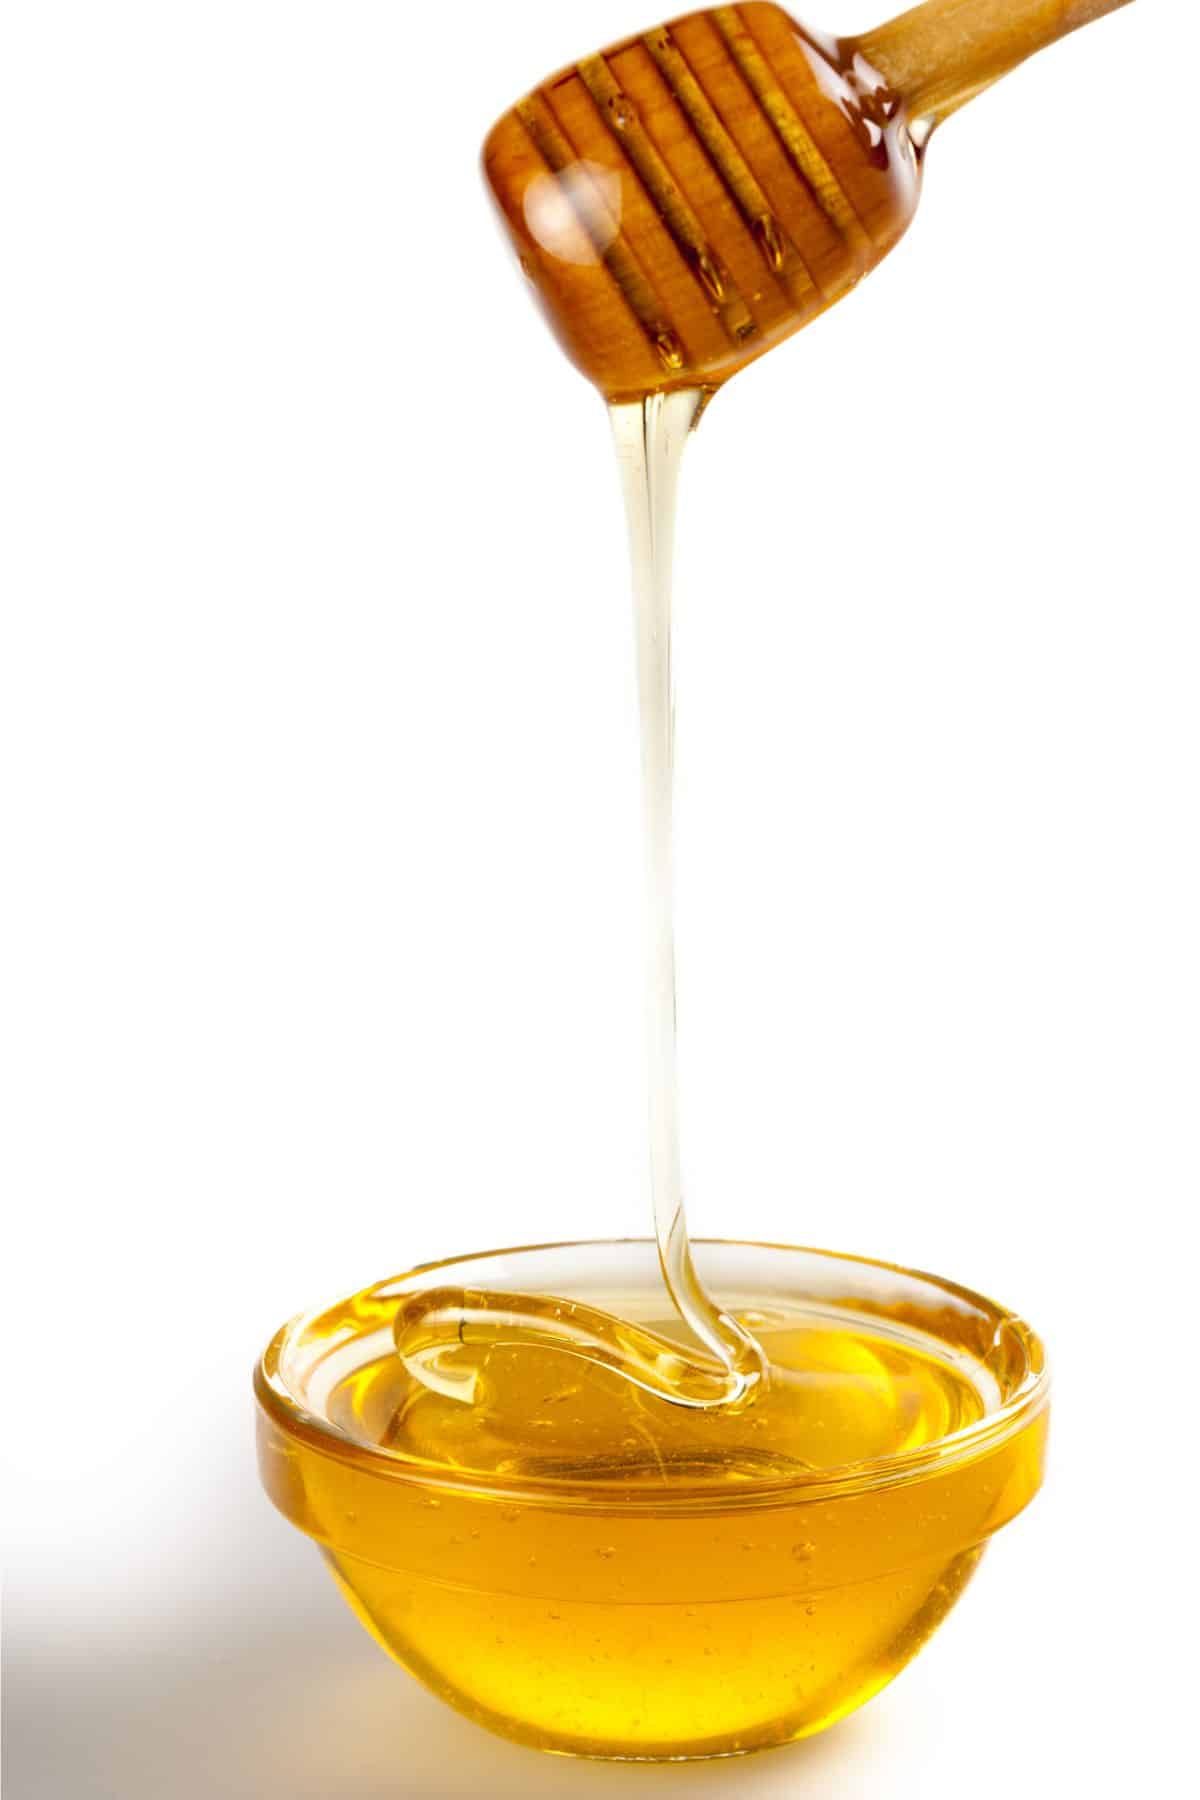 Honey pouring into clear bowl on white background.